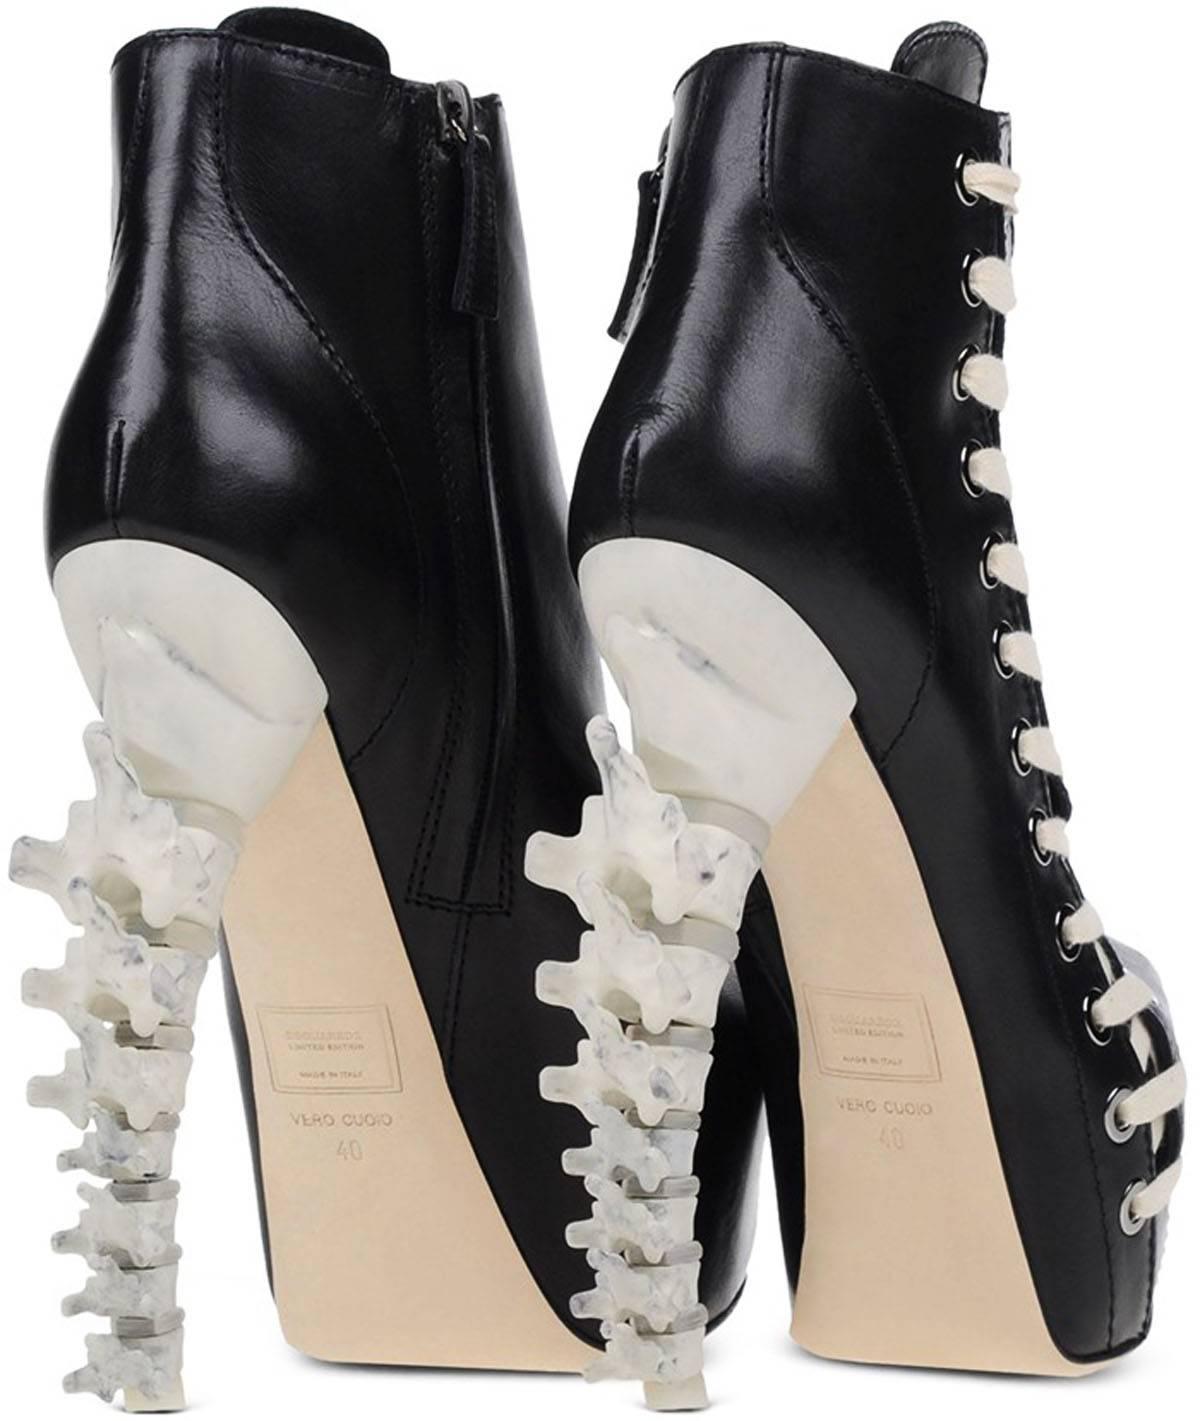 New Dsquared2 Limited Edition Icon Spine Heel Leather Ankle Booties
Italian sizes available - 36, 39 and 40 ( US 6, 9, 10 )
Color - Black
100% Leather
Faux Laces Along the Side
Zip Closure on Side
Hidden Platform - 2 inches
Faux Bone Heel - 6